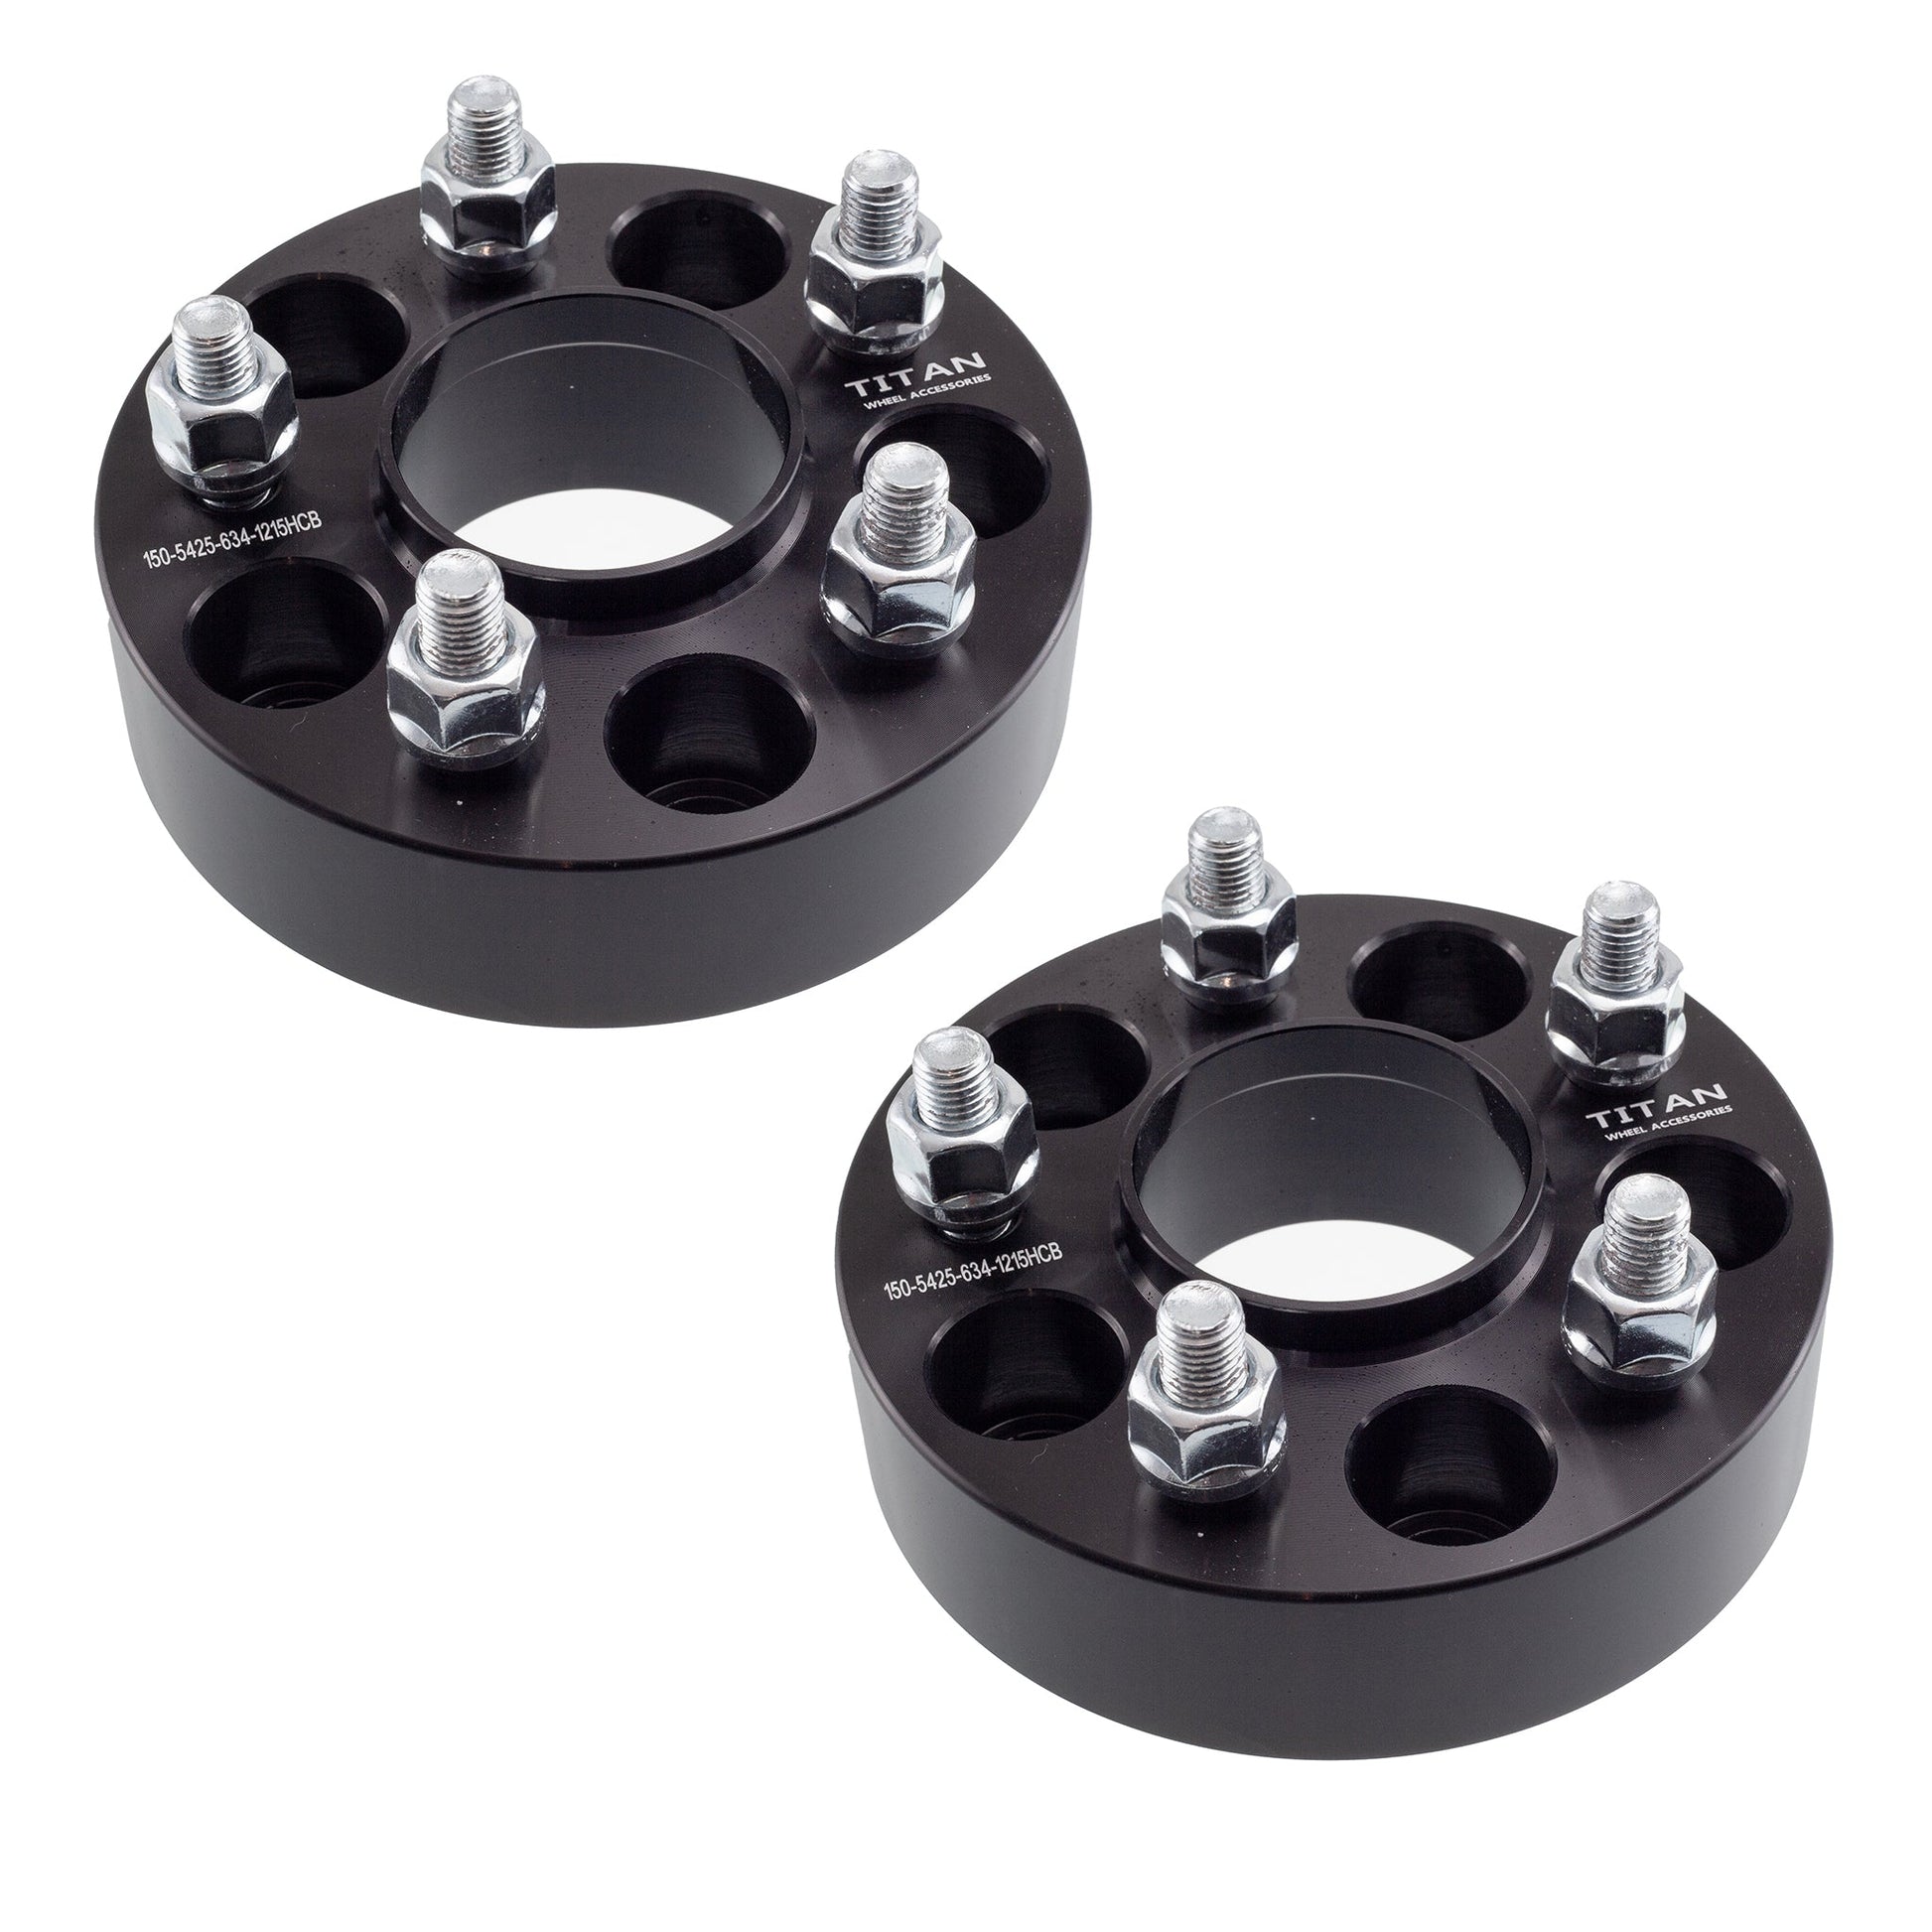 1.5" (38mm) Titan Wheel Spacers for Volvo C30 C70 S40 V50 | 5x4.25 (5x108) | 63.4 Hubcentric | 12x1.5 Studs |  Set of 4 | Titan Wheel Accessories